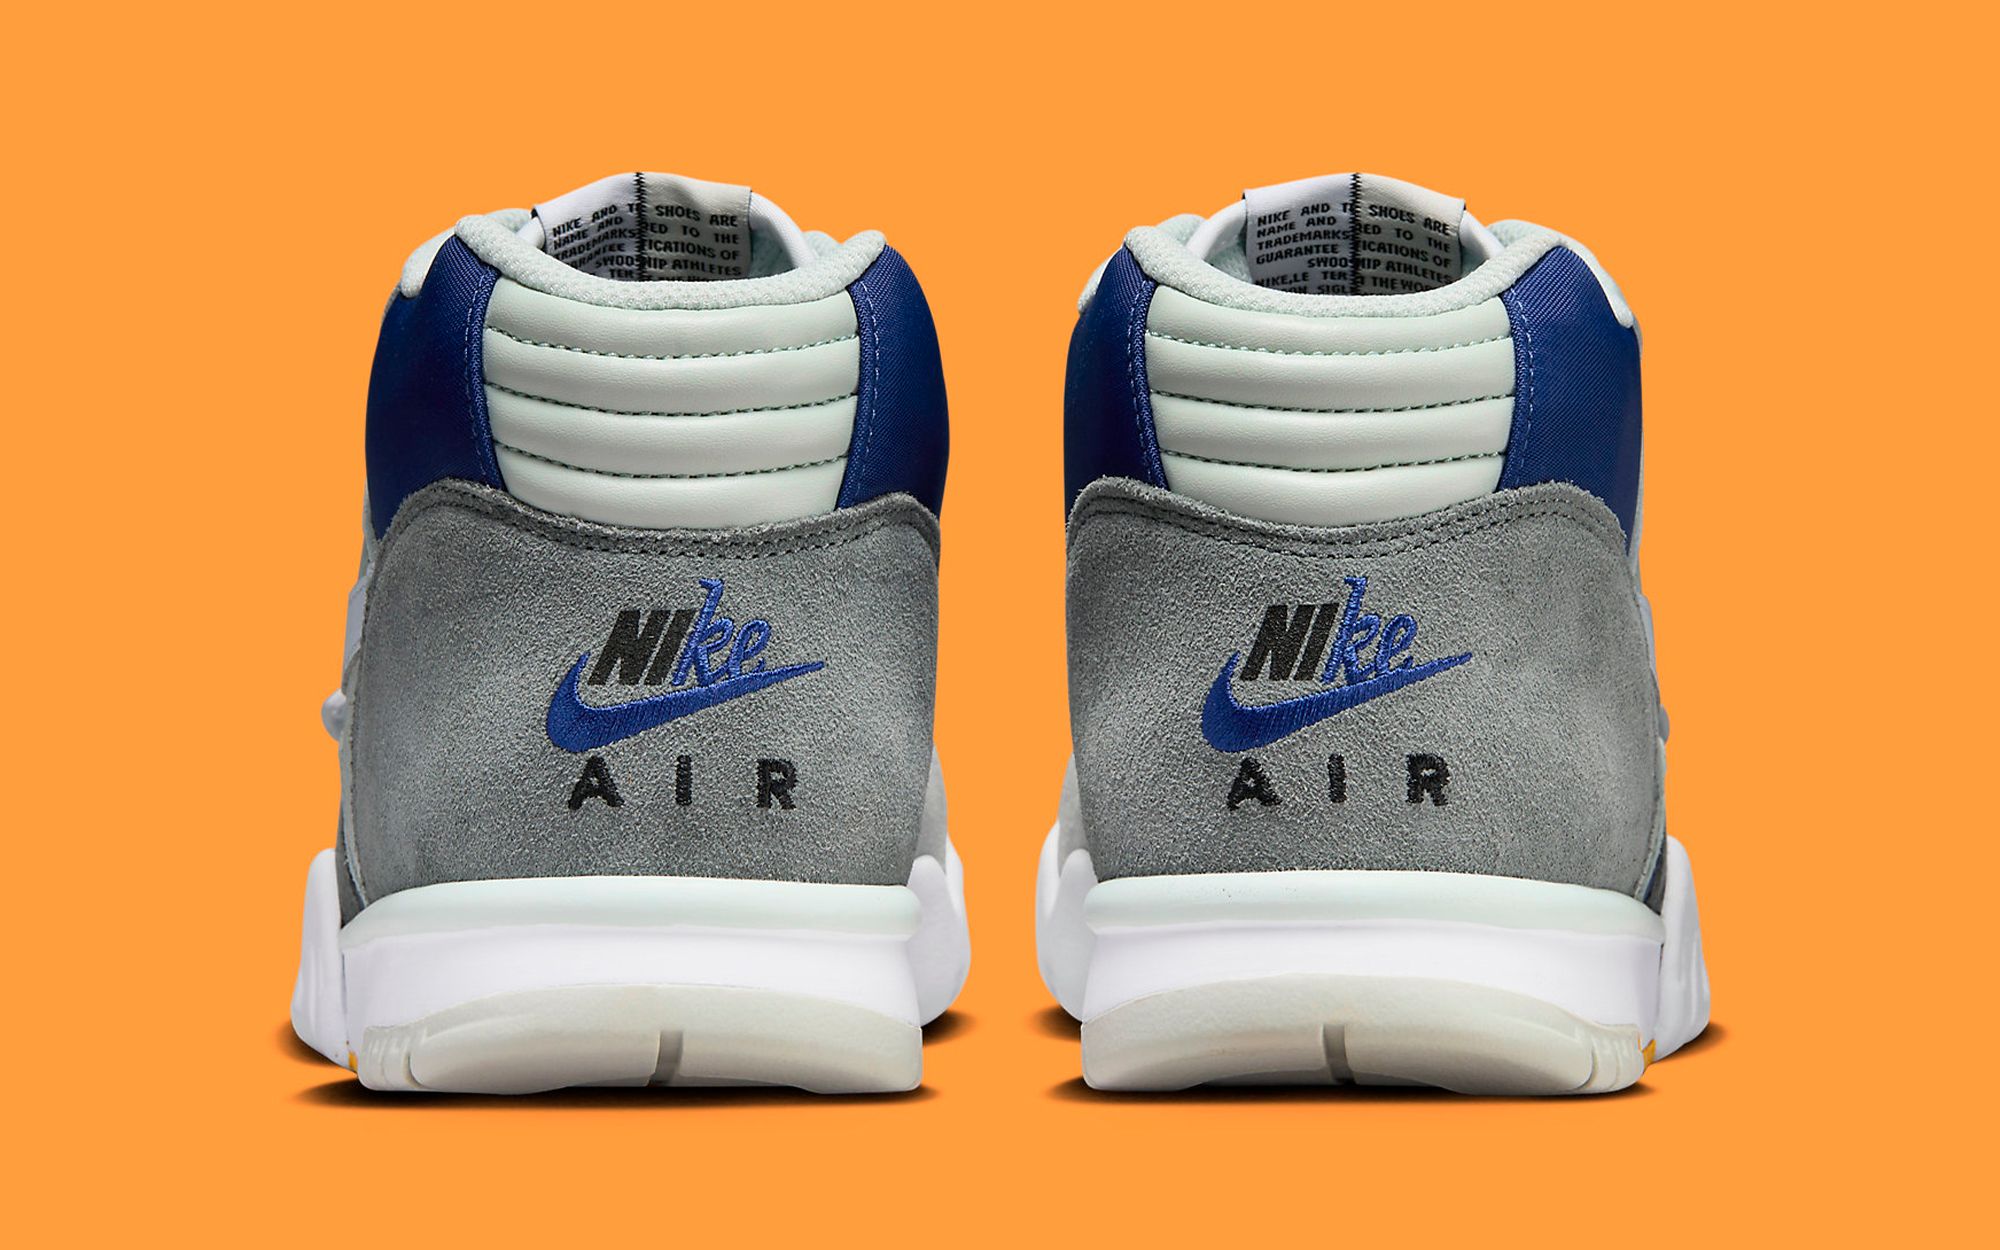 The Nike Air Trainer 1 “Split” Surfaces in Grey and Navy | House